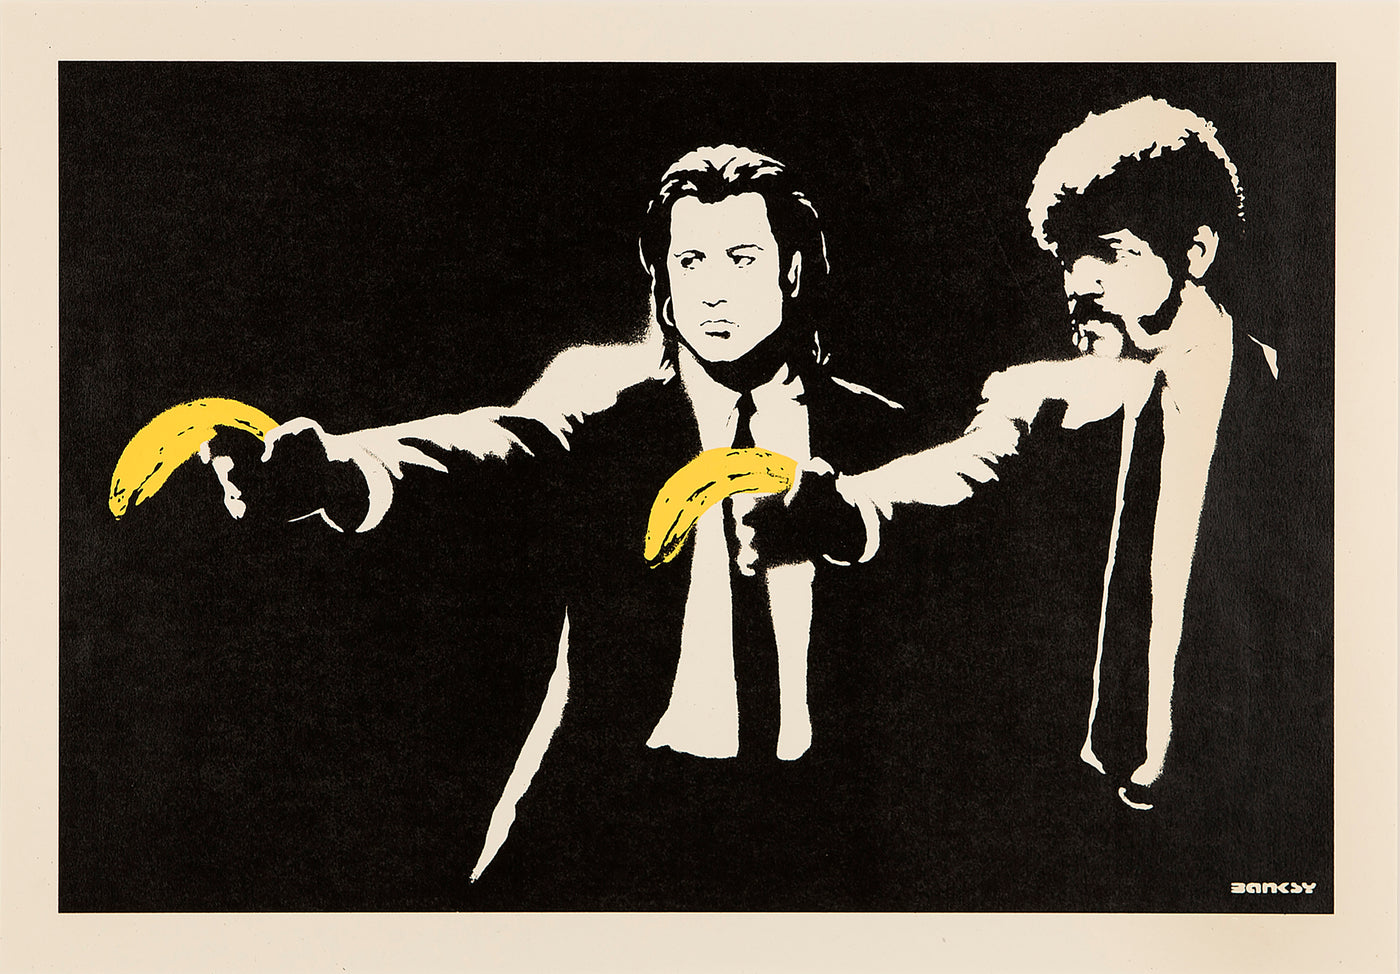 Banksy Pulp Fiction for sale on Deodato.us